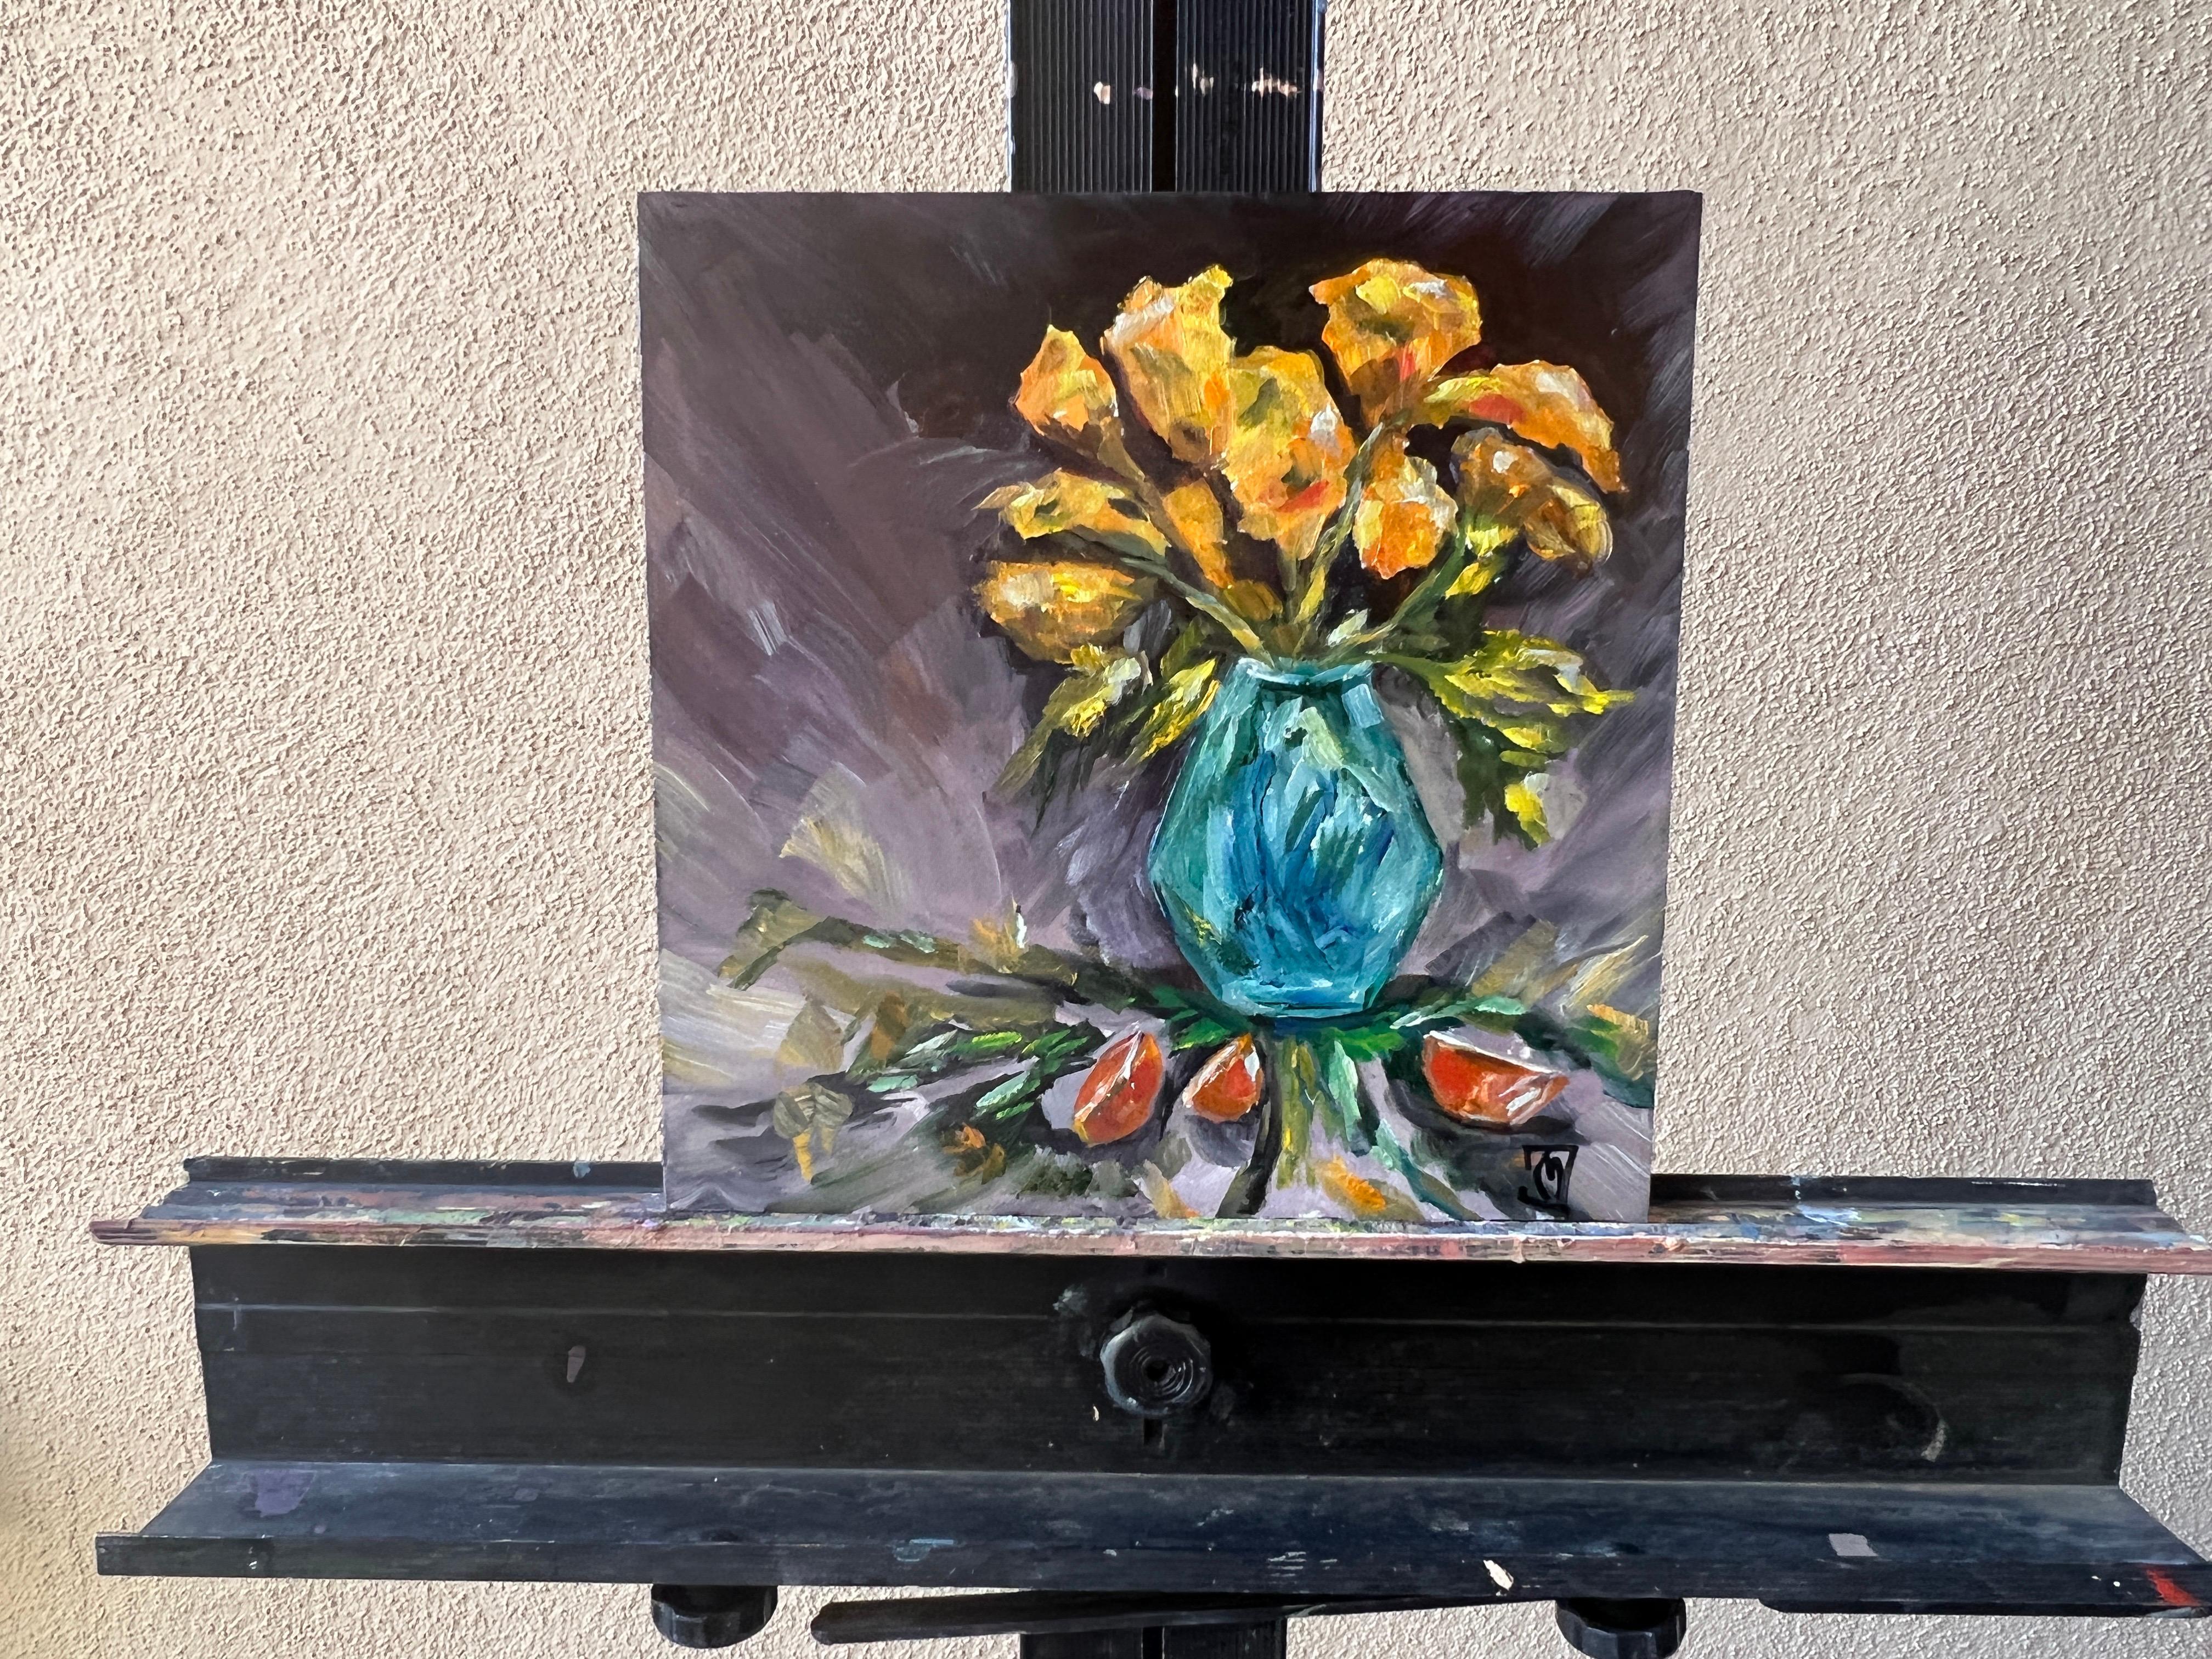 <p>Artist Comments<br>Created in early spring when poppies are in full bloom, artist Marilyn Froggatt displays a striking still life of the delicate flower. The petals gleam a vibrant orange while the leaves appear soft and feathery like a fern.